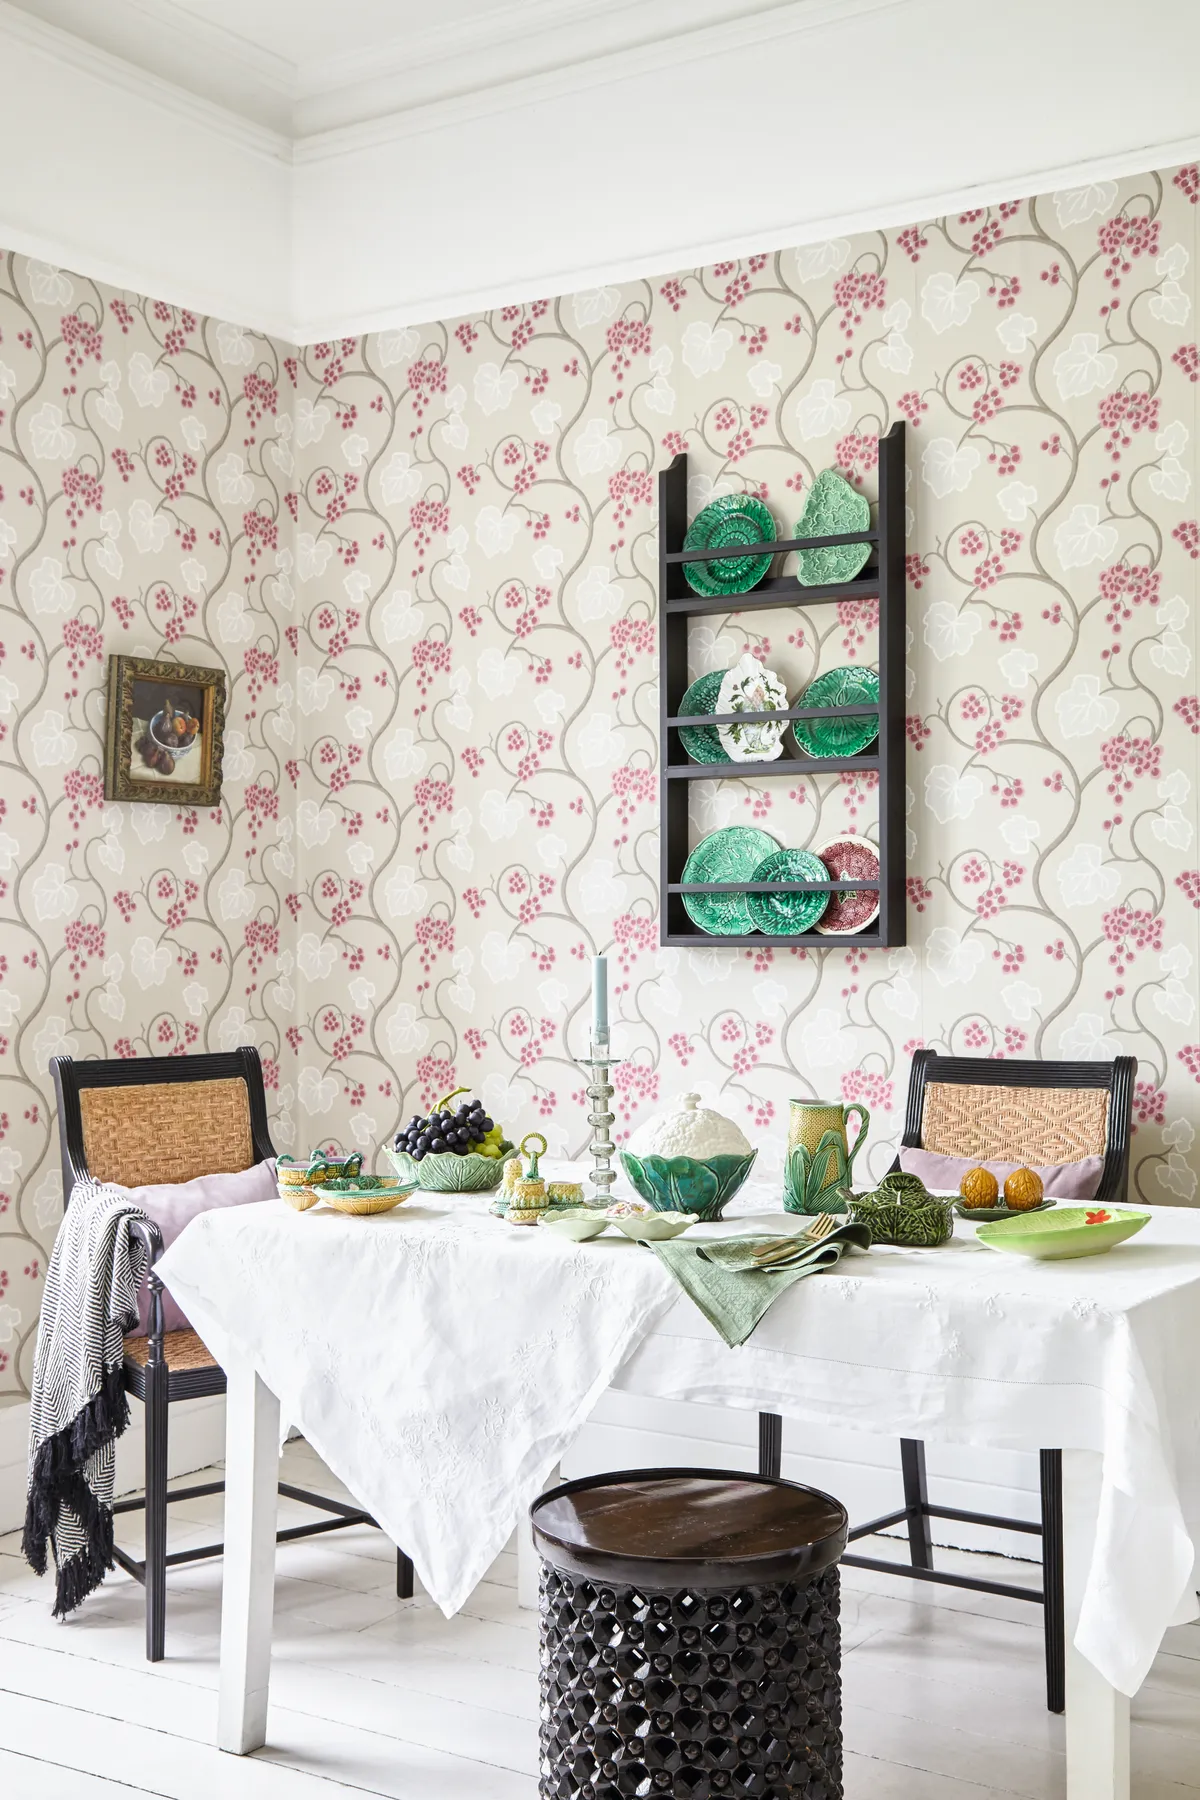 A plate rack filled with vintage pieces creates a striking focal point in the dining room. As well as being an intriguing display, it also means you have your favourite pieces close to hand for setting the table